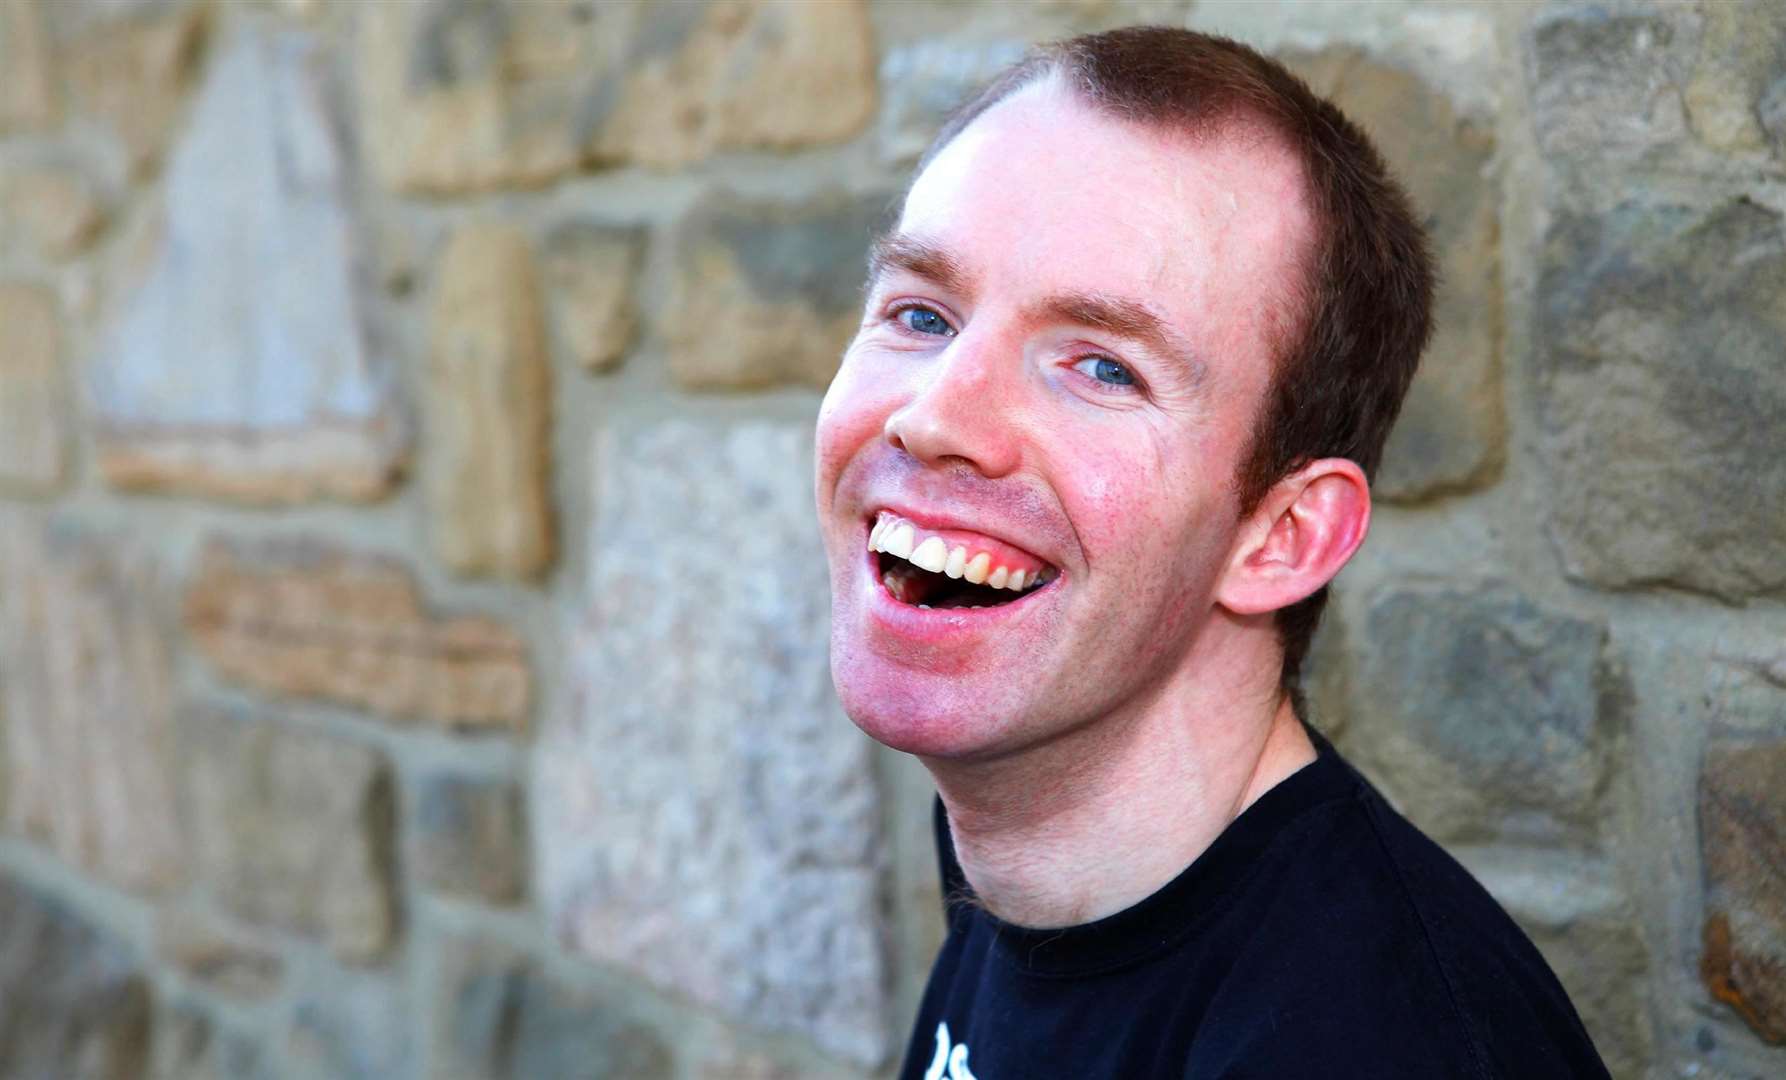 Lee Ridley, aka, Lost Voice Guy